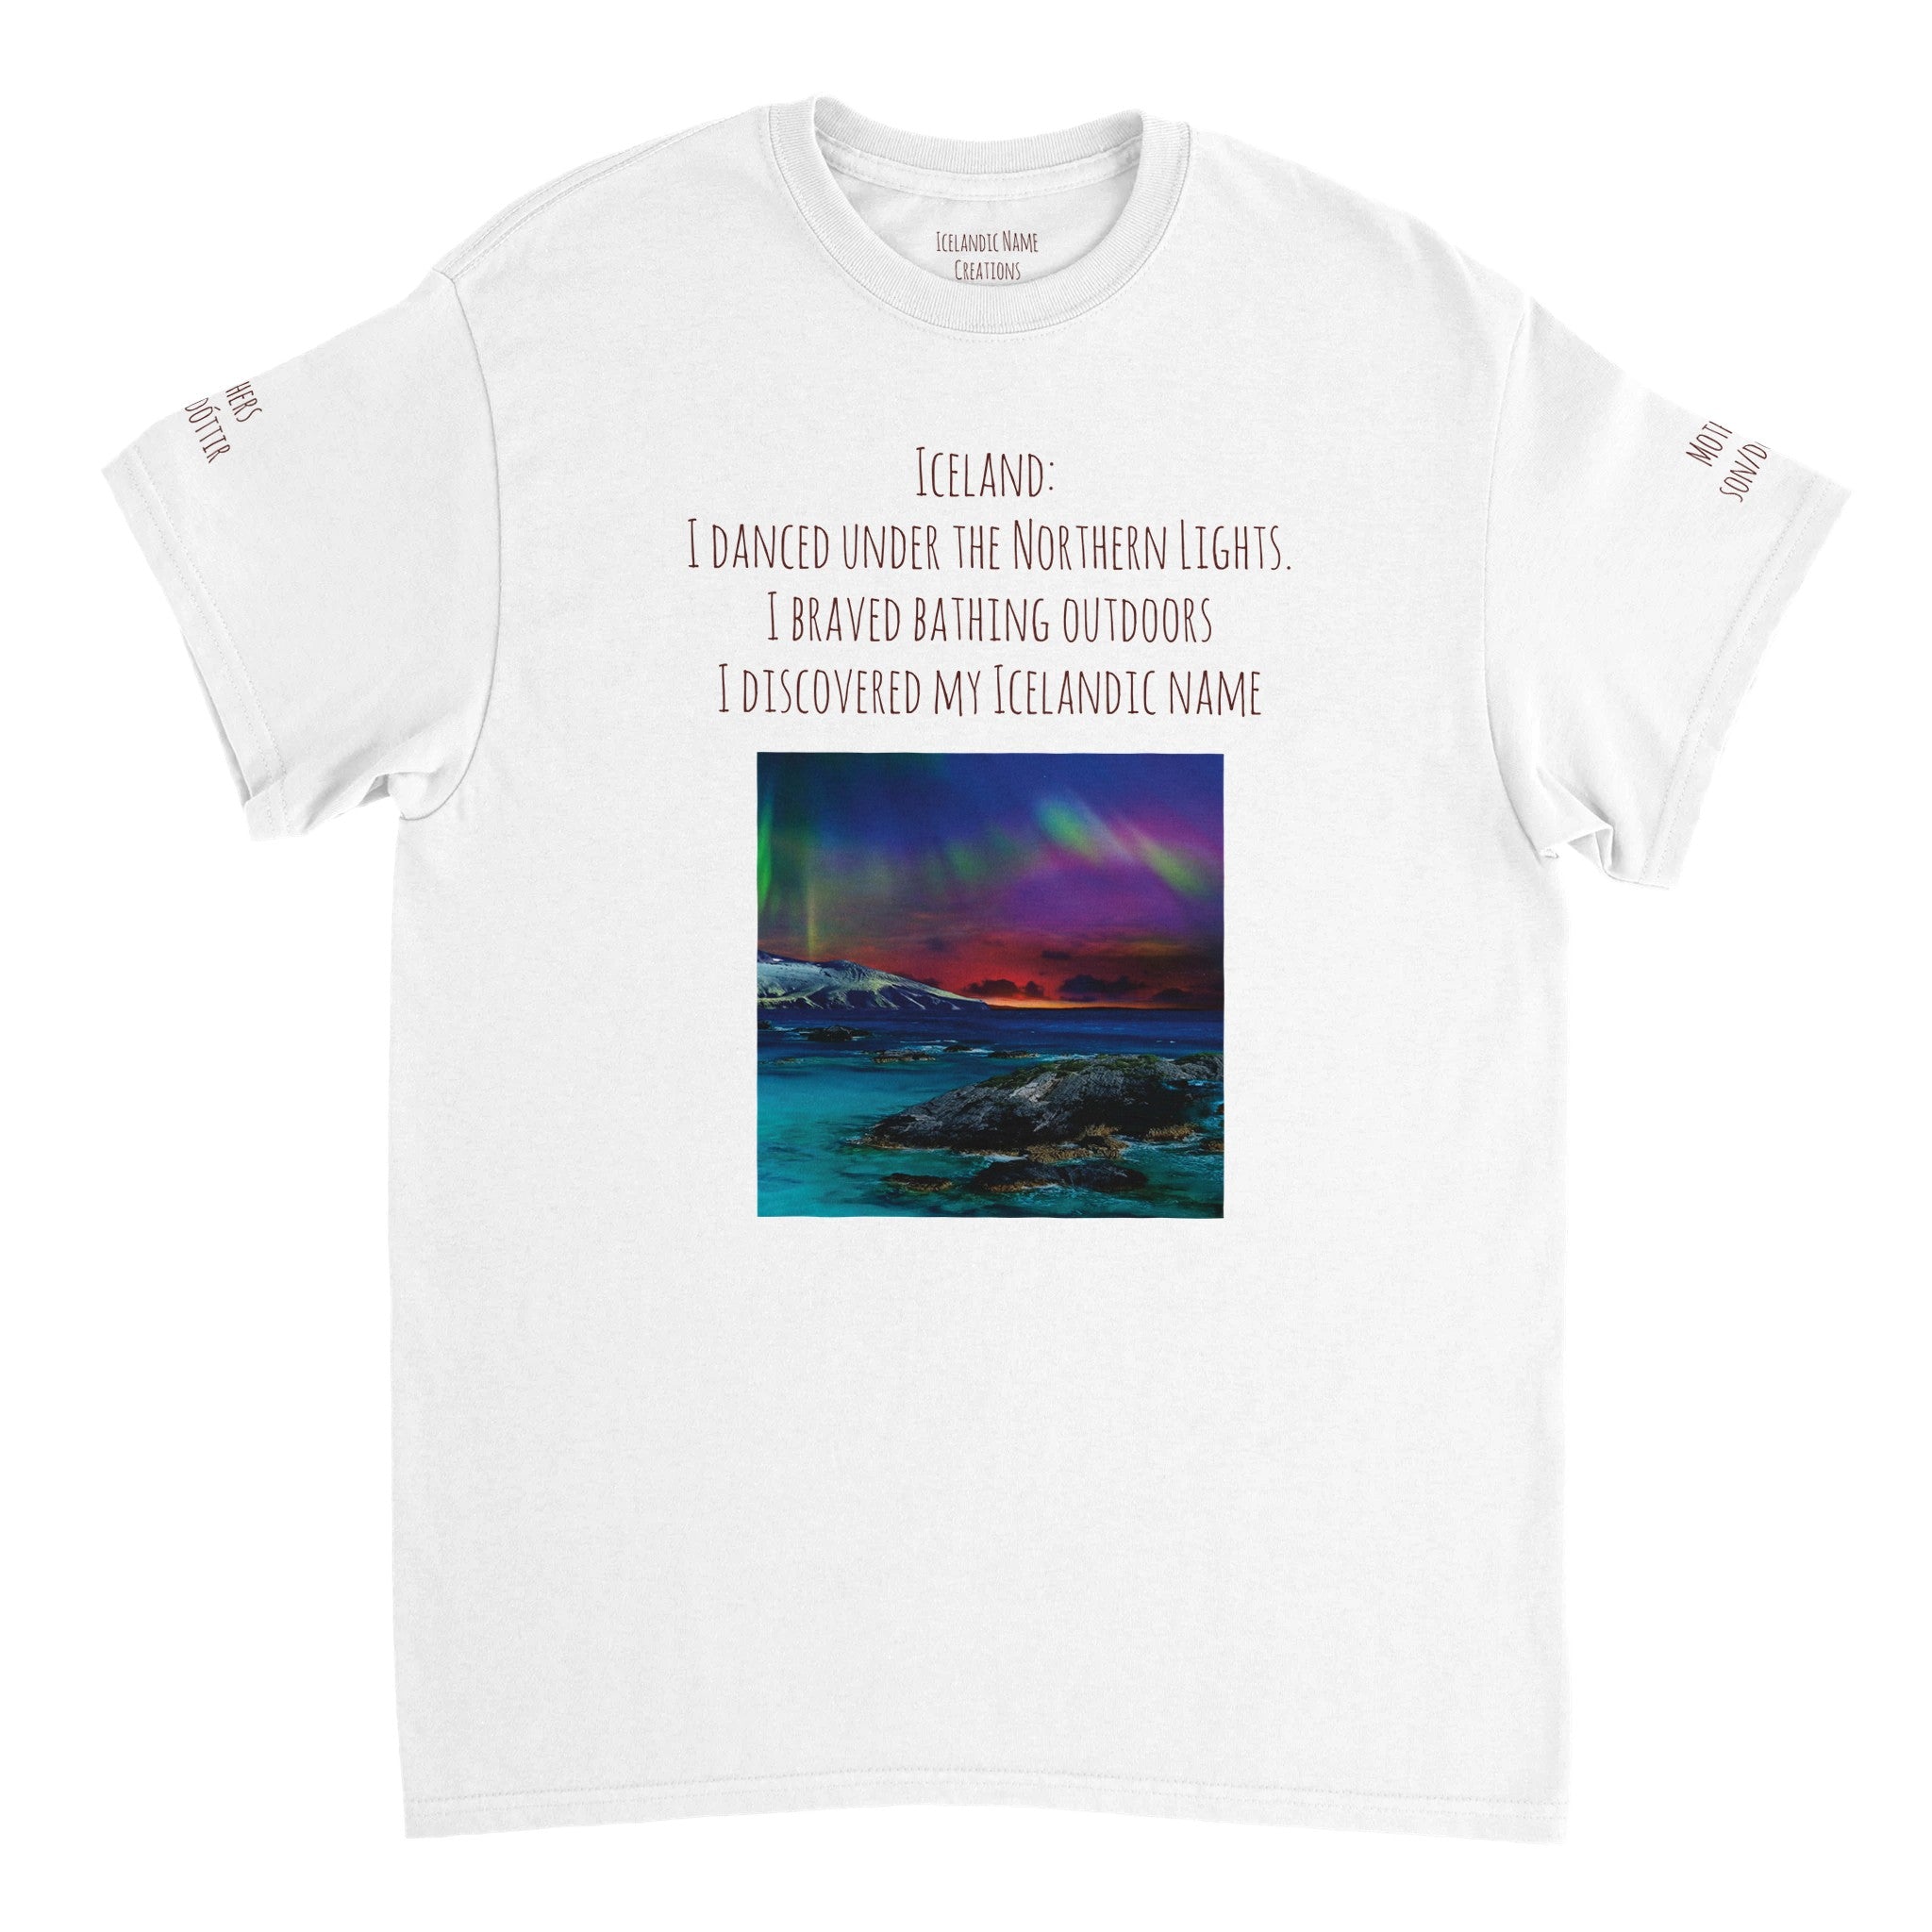 White Northern Lights T-shirt, customizable with Icelandic name, [user's uploaded photo if possible], front and back and both sleeves design 26d774d5-2bdf-4d7d-ae4a-dfc86206900b